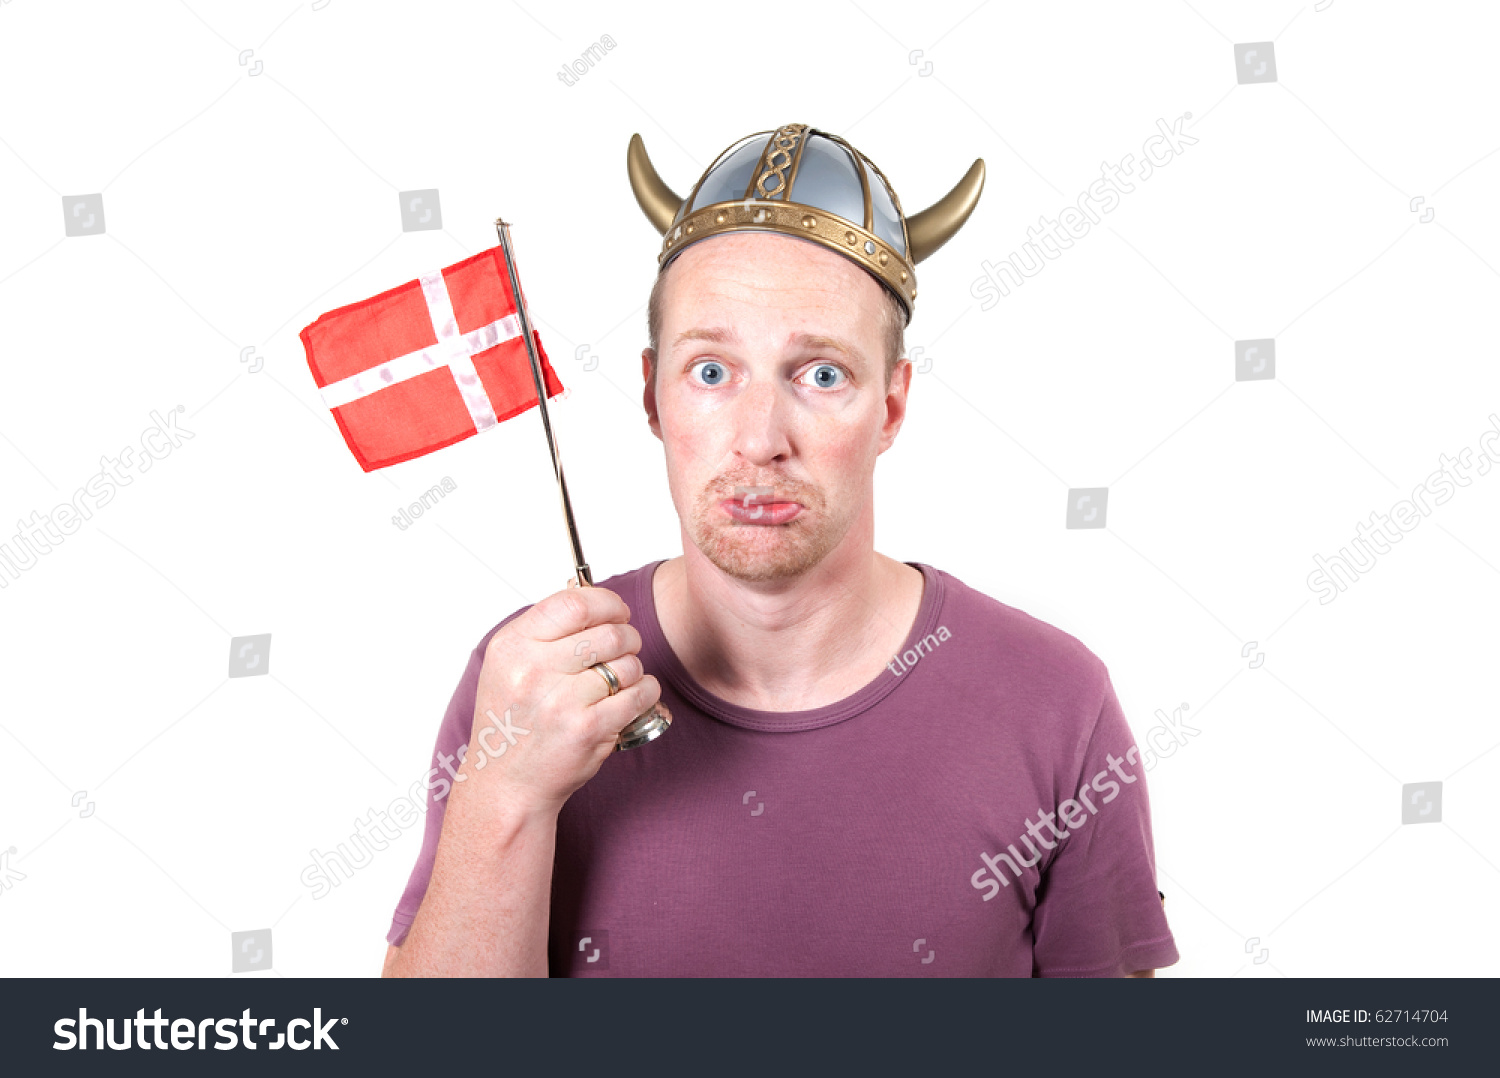 Image result for Danish in the middle